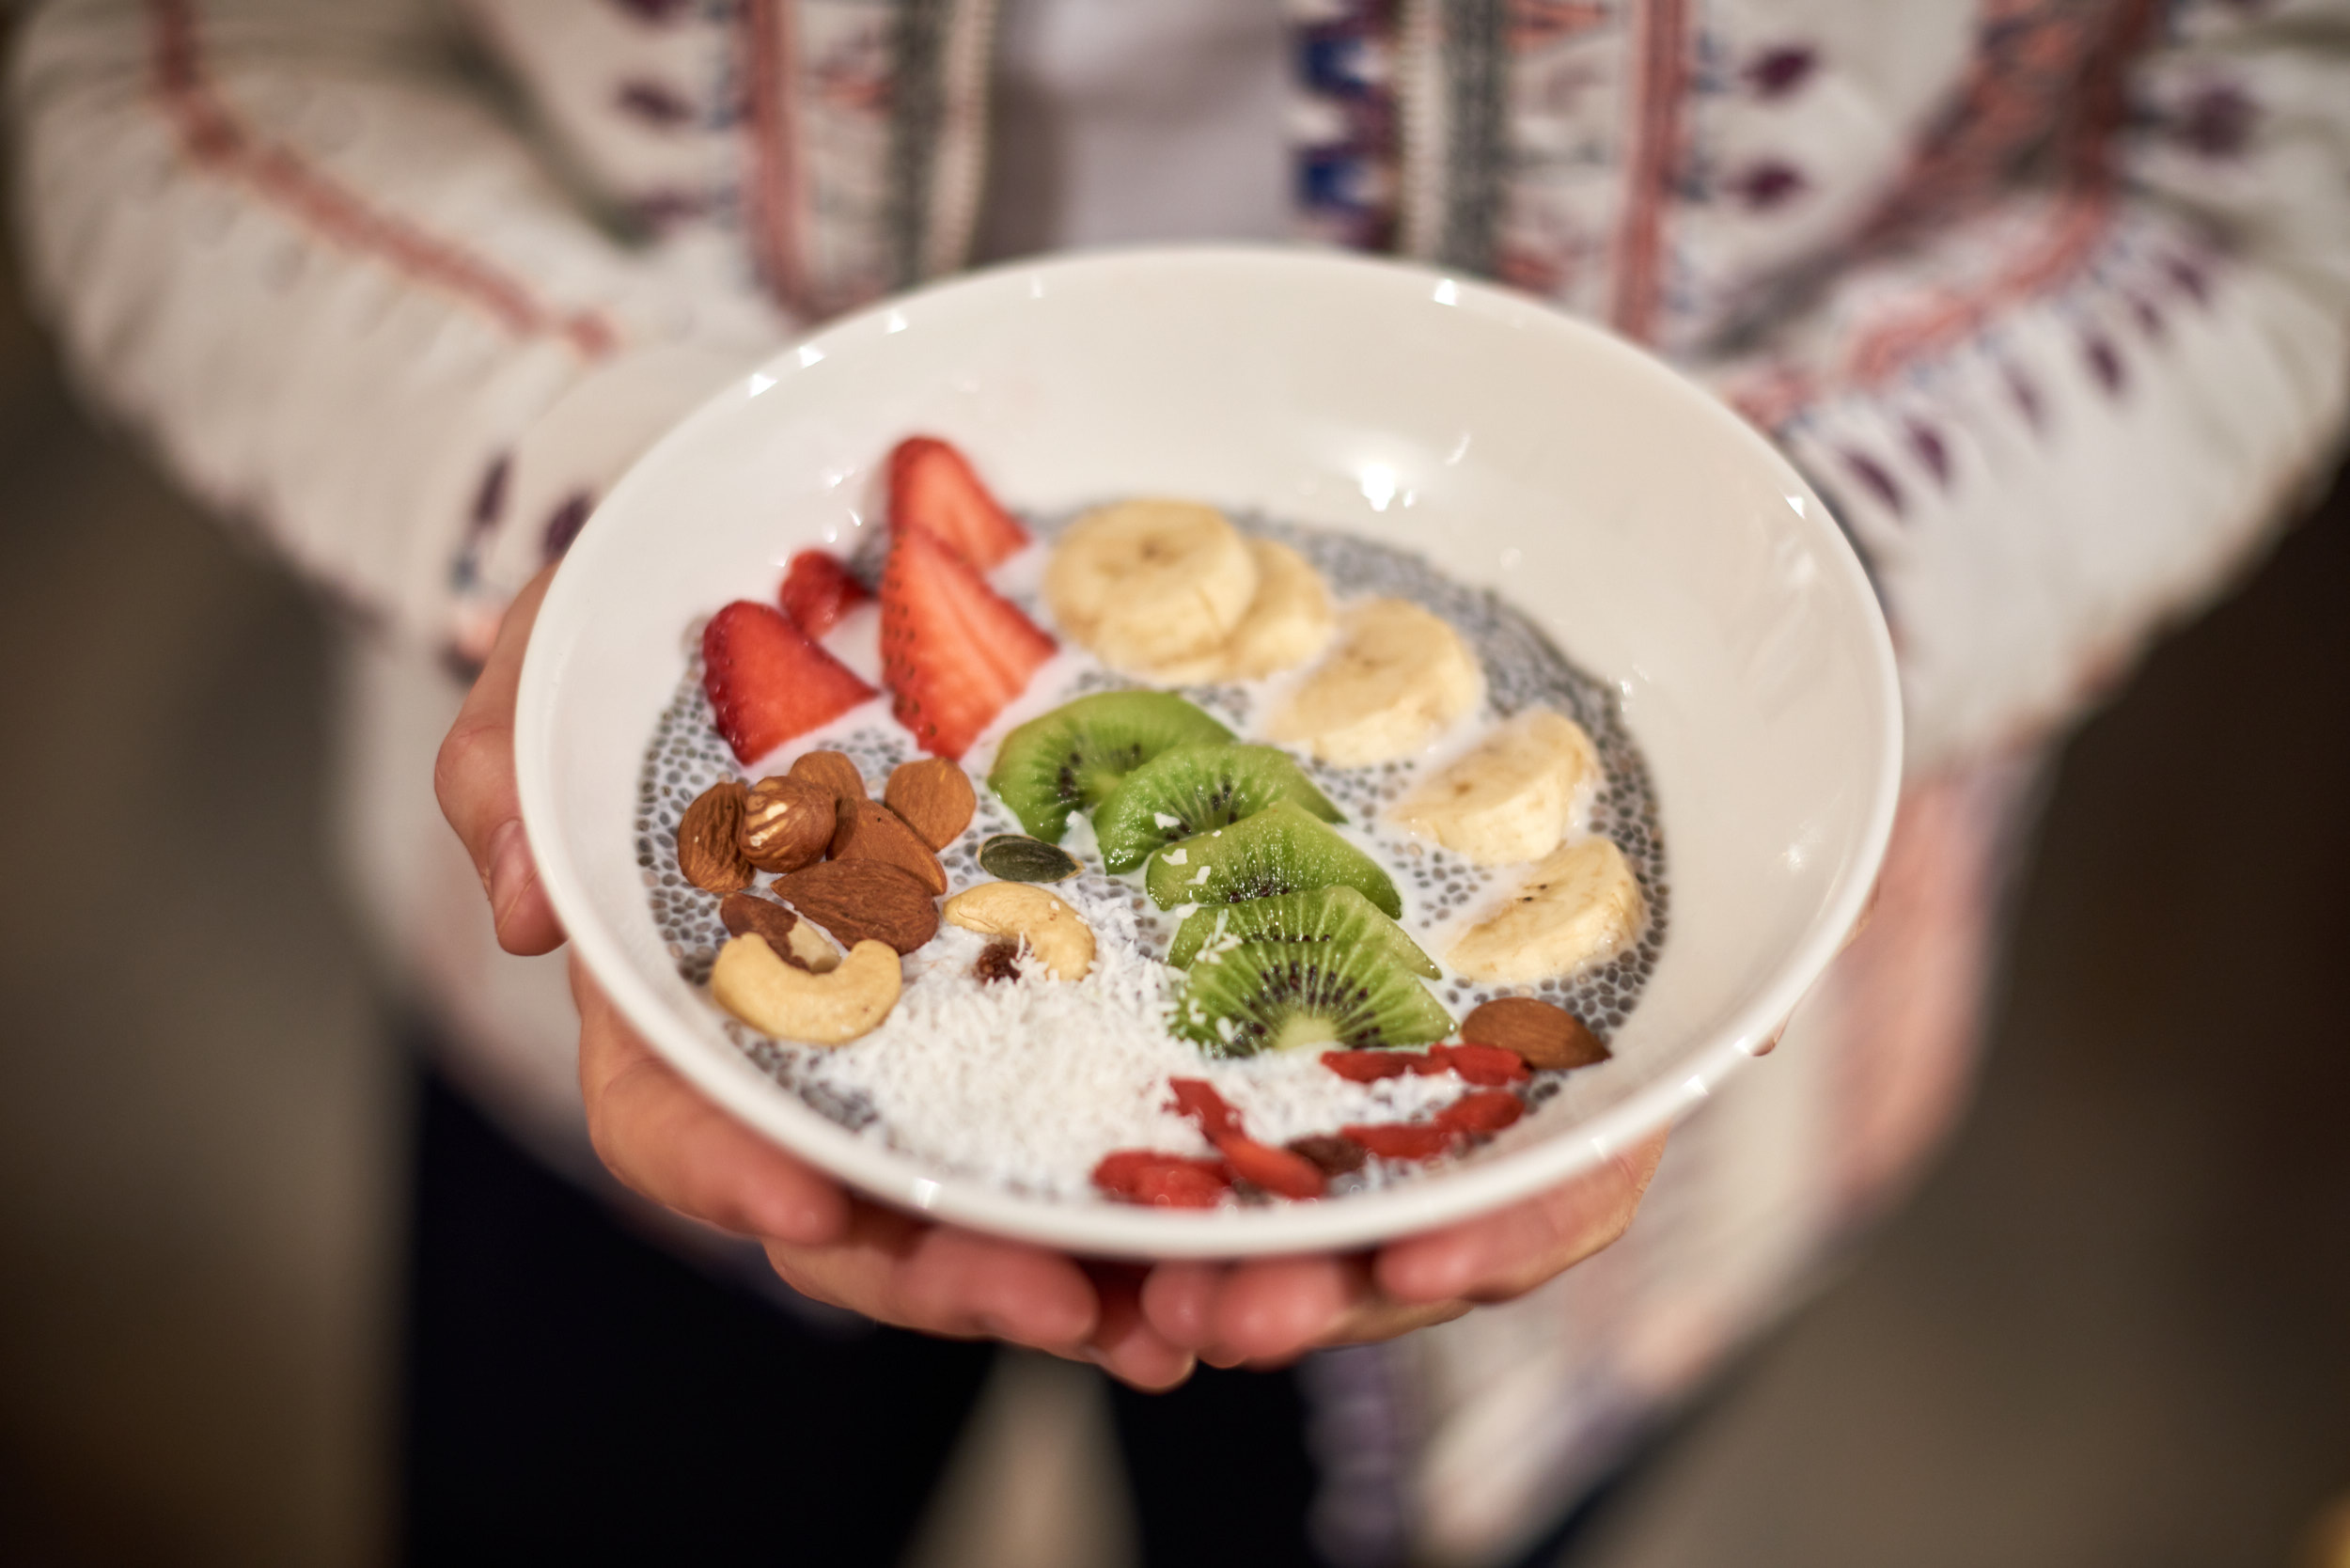 Kick Start Your Week With This Delicious Chia Bowl Recipe